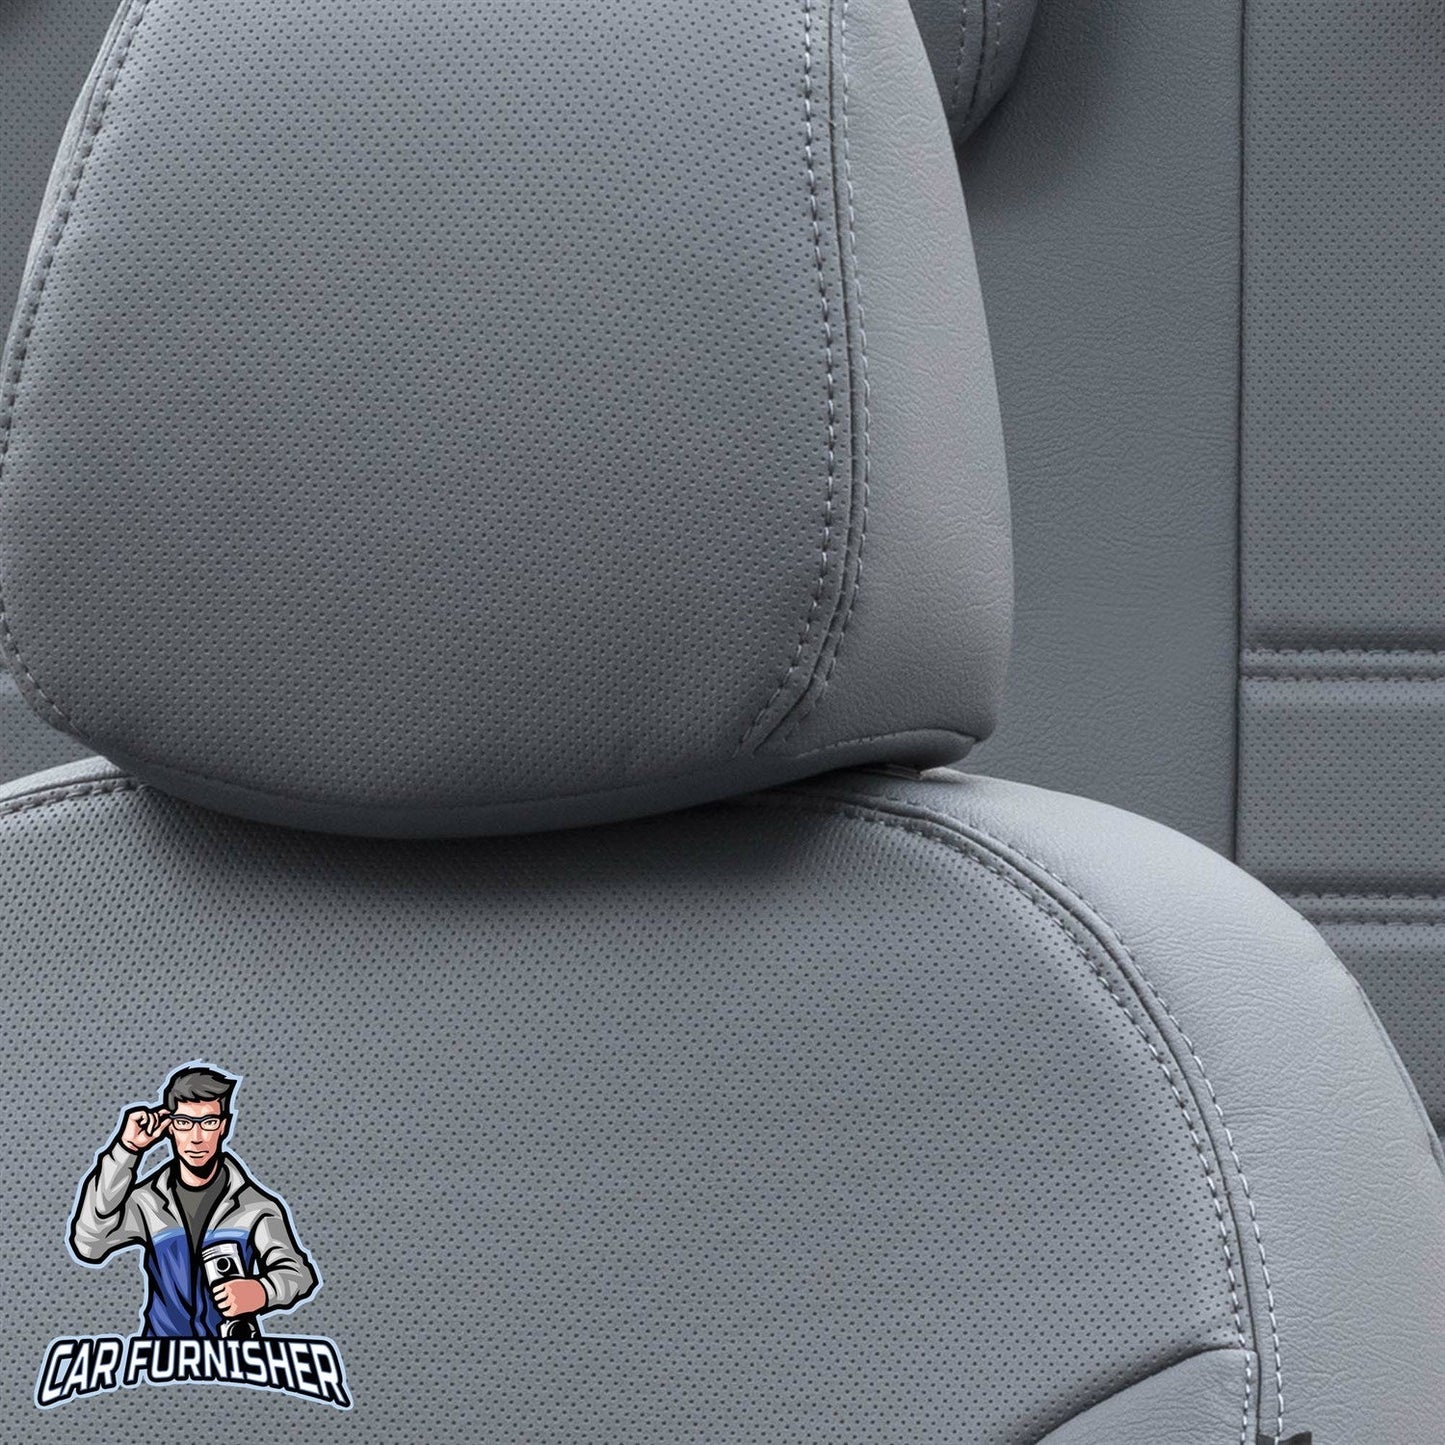 Renault Safrane Seat Covers Istanbul Leather Design Smoked Leather